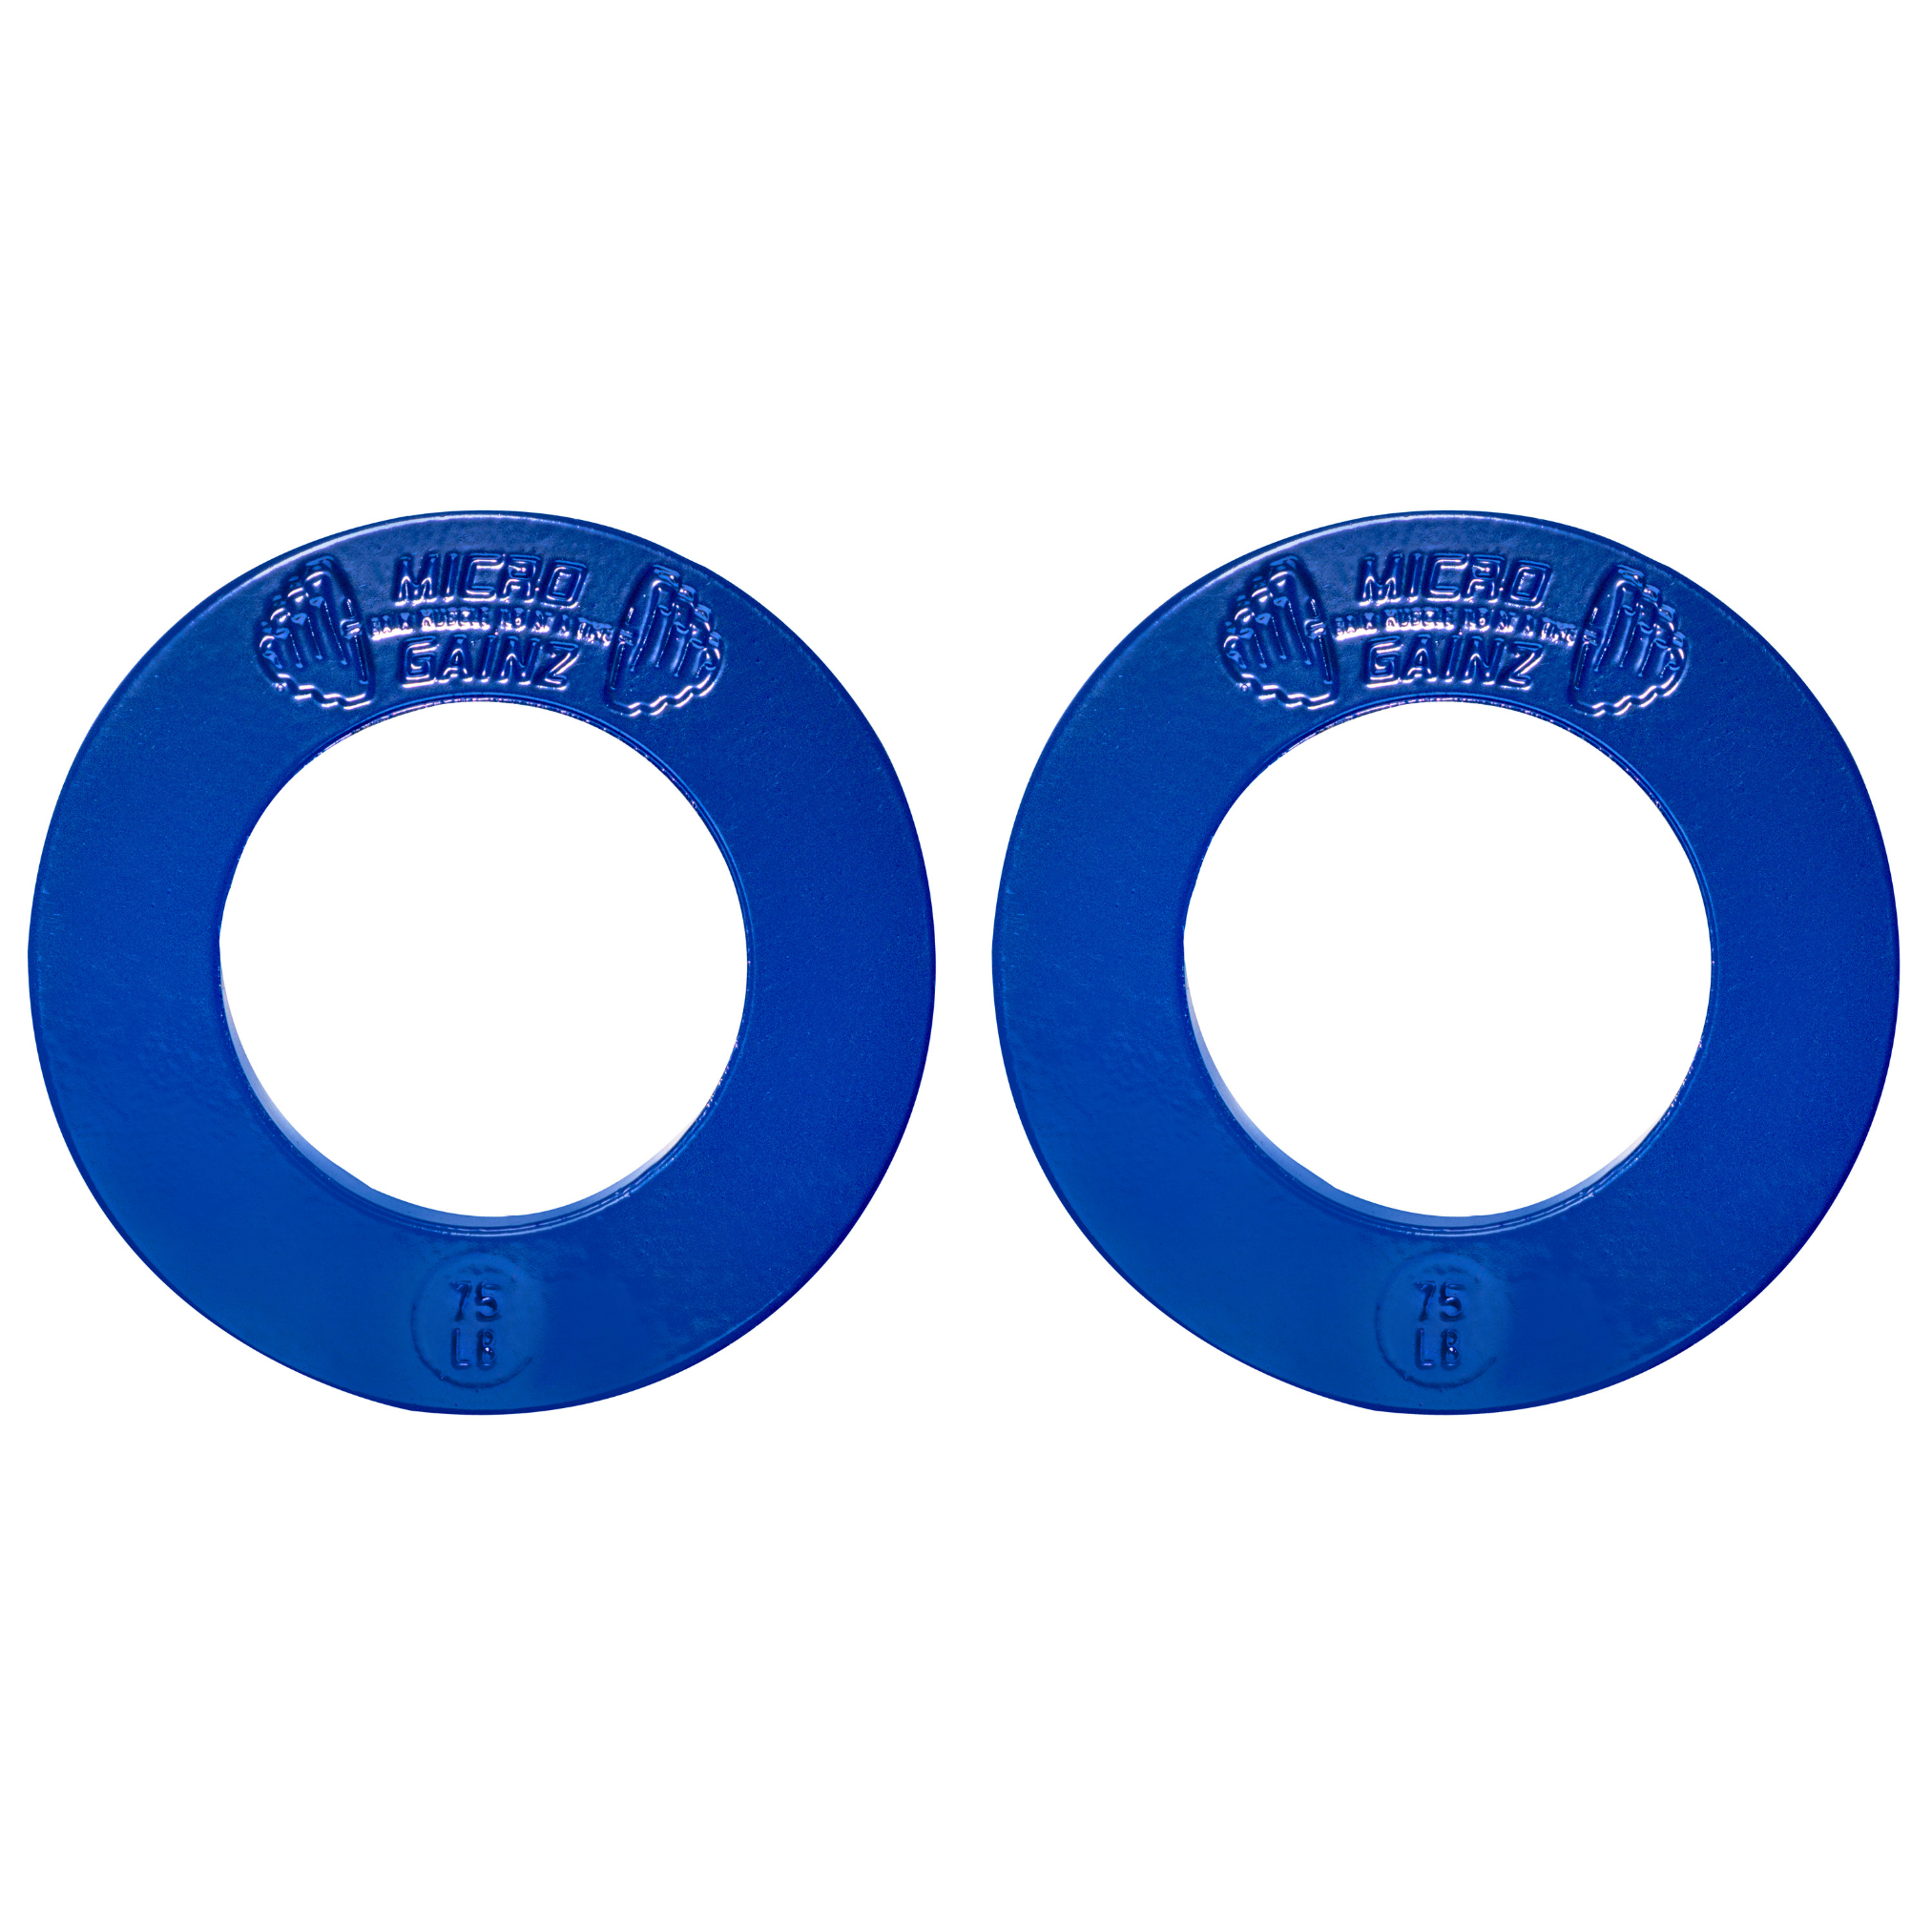 Micro Gainz Olympic Size Fractional Weight Plates Pair of Blue .75LB Plates